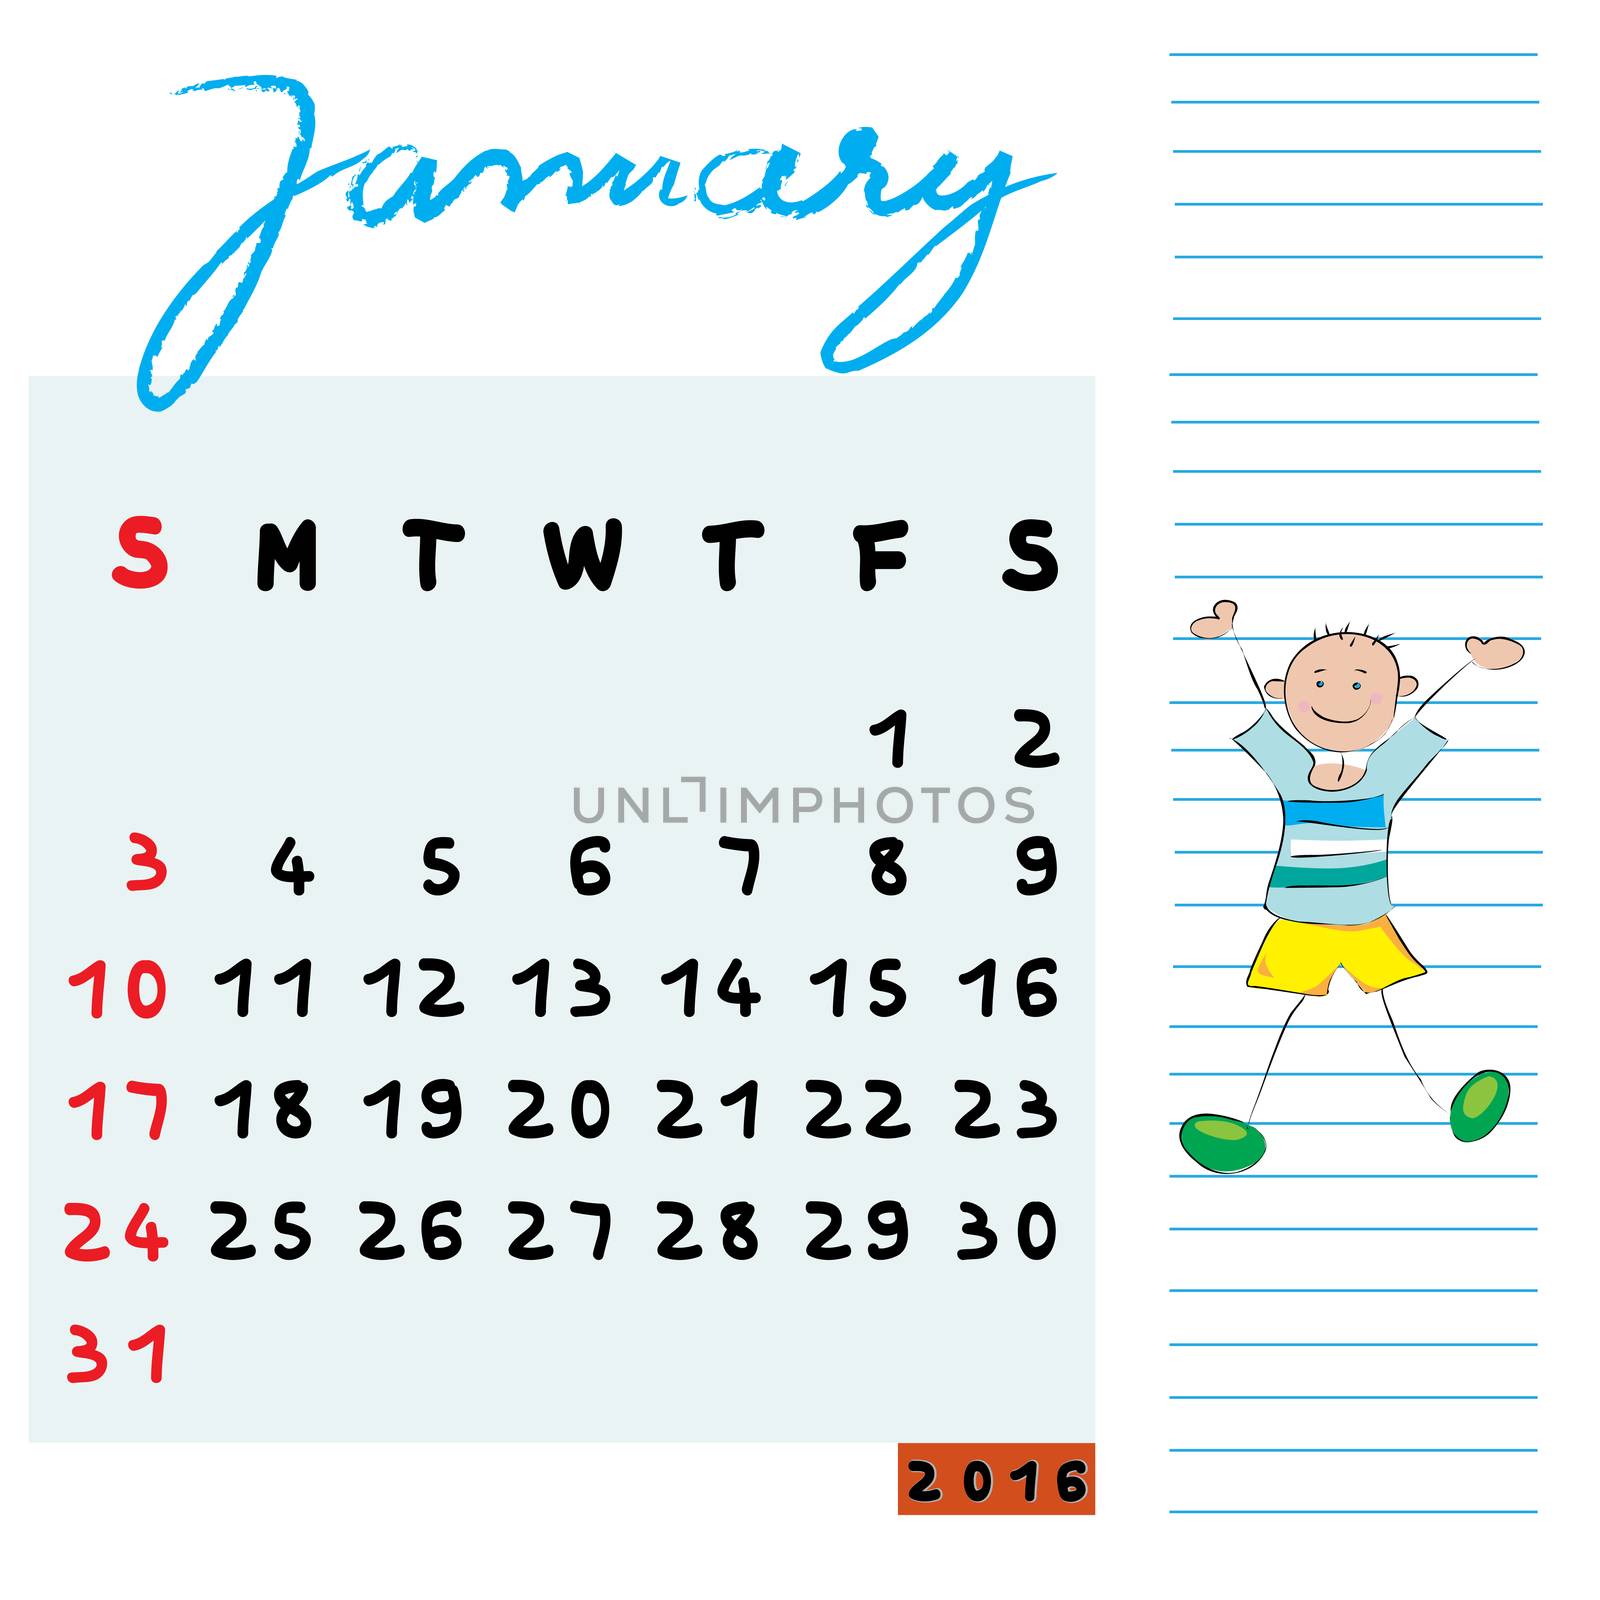 Hand drawn design of January 2016 calendar with kid illustration, the happy student profile for international schools